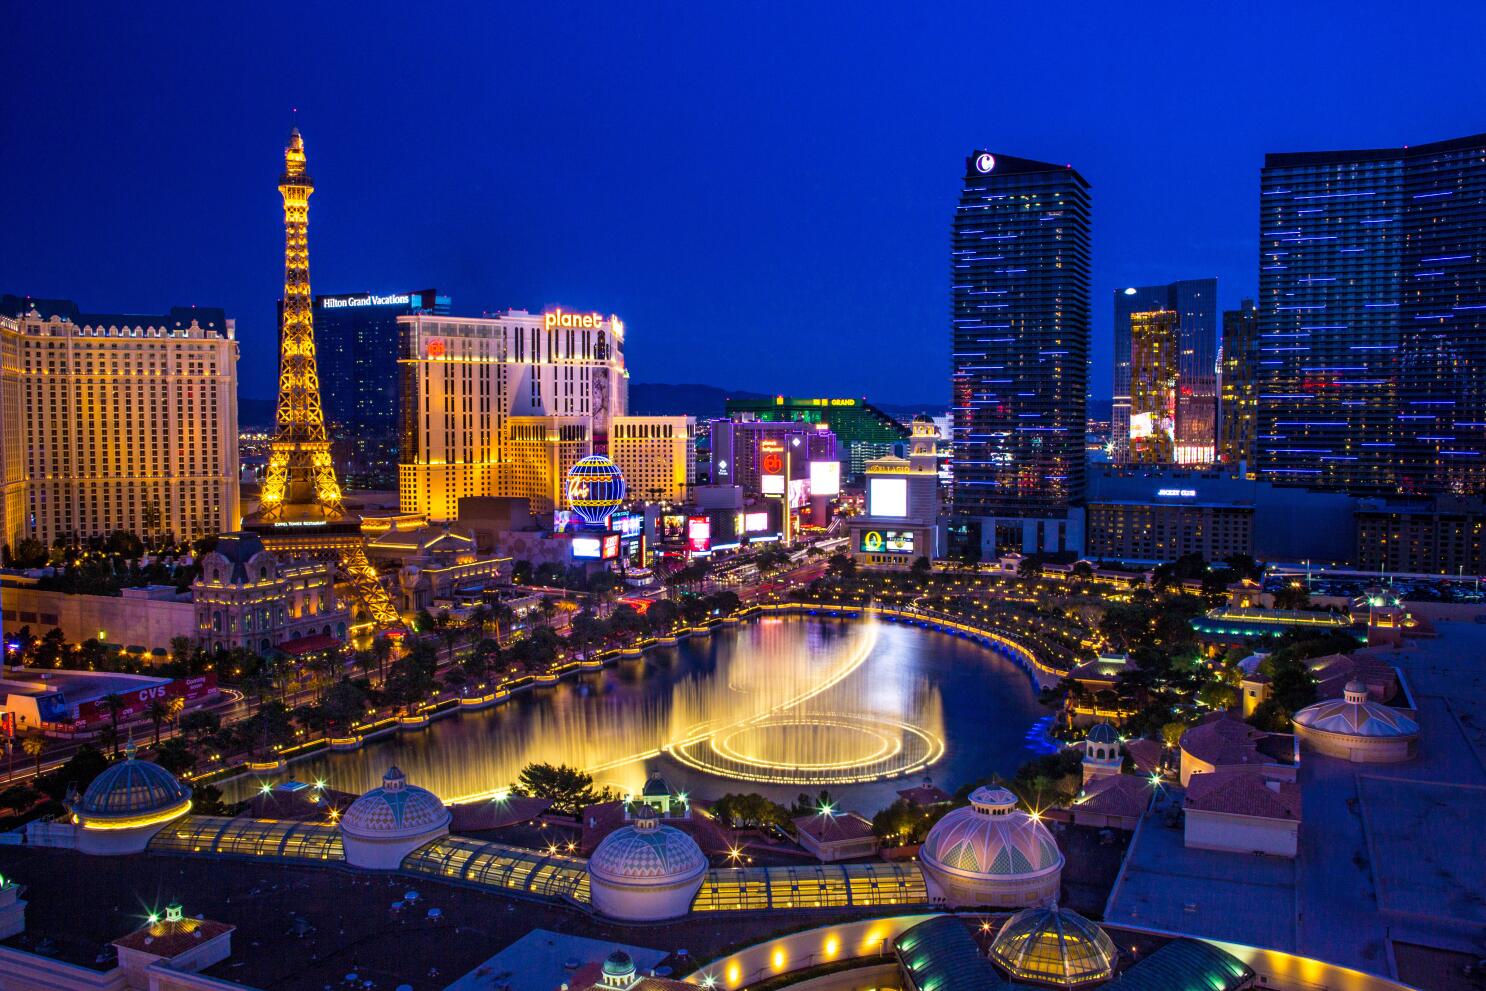 Buy online here What It's Like to Visit Las Vegas Now: Shows, Food